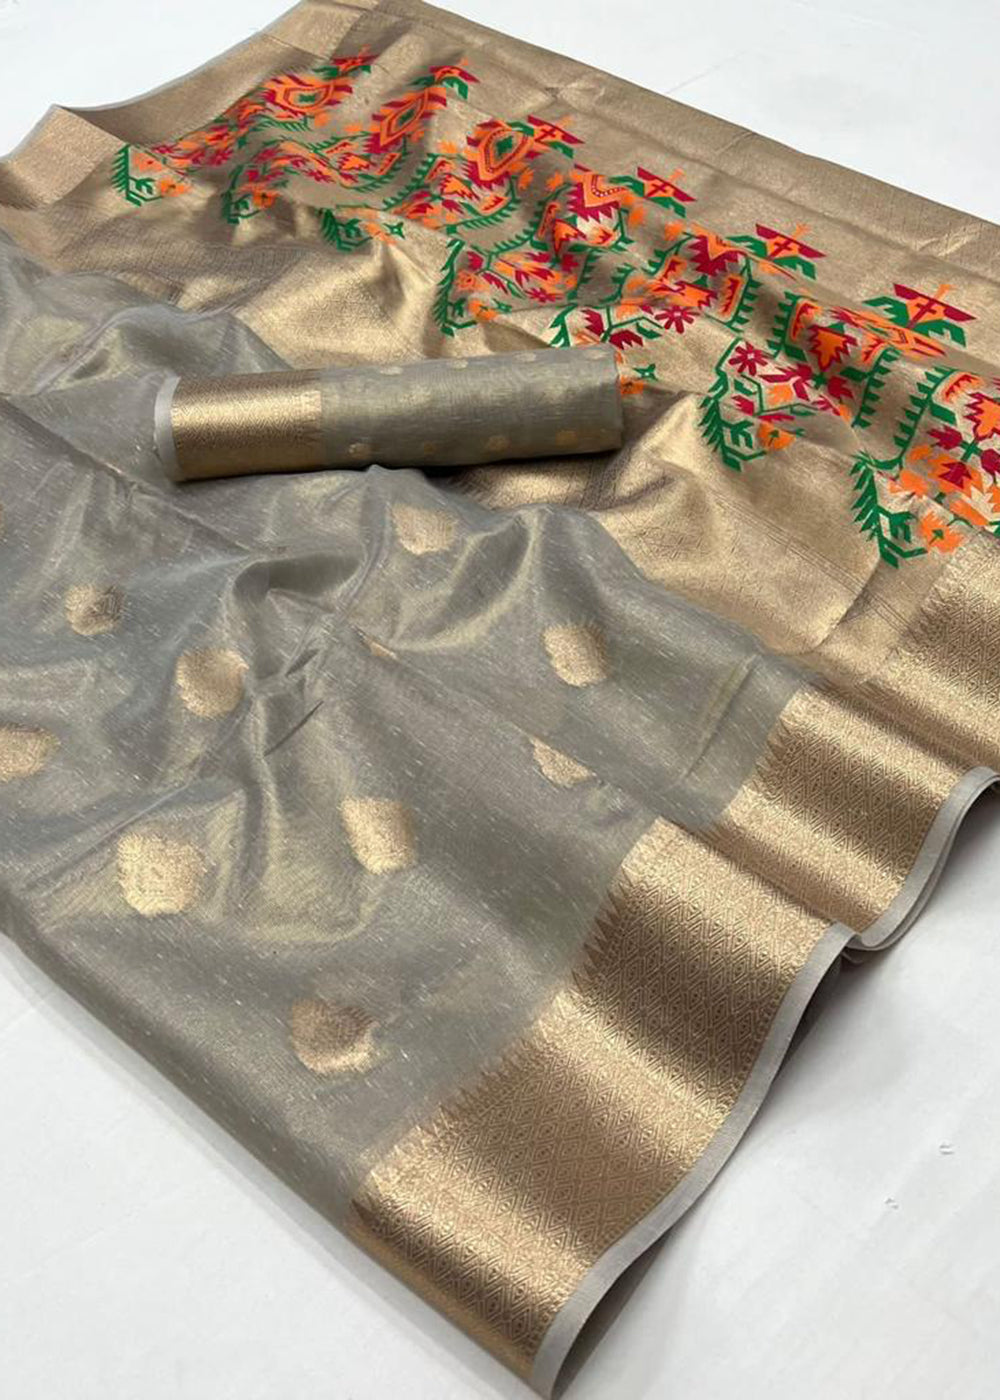 Buy Now Grey Handwoven Tissue Fabric Festive & Party Style Saree Online in USA, UK, Canada & Worldwide at Empress Clothing.